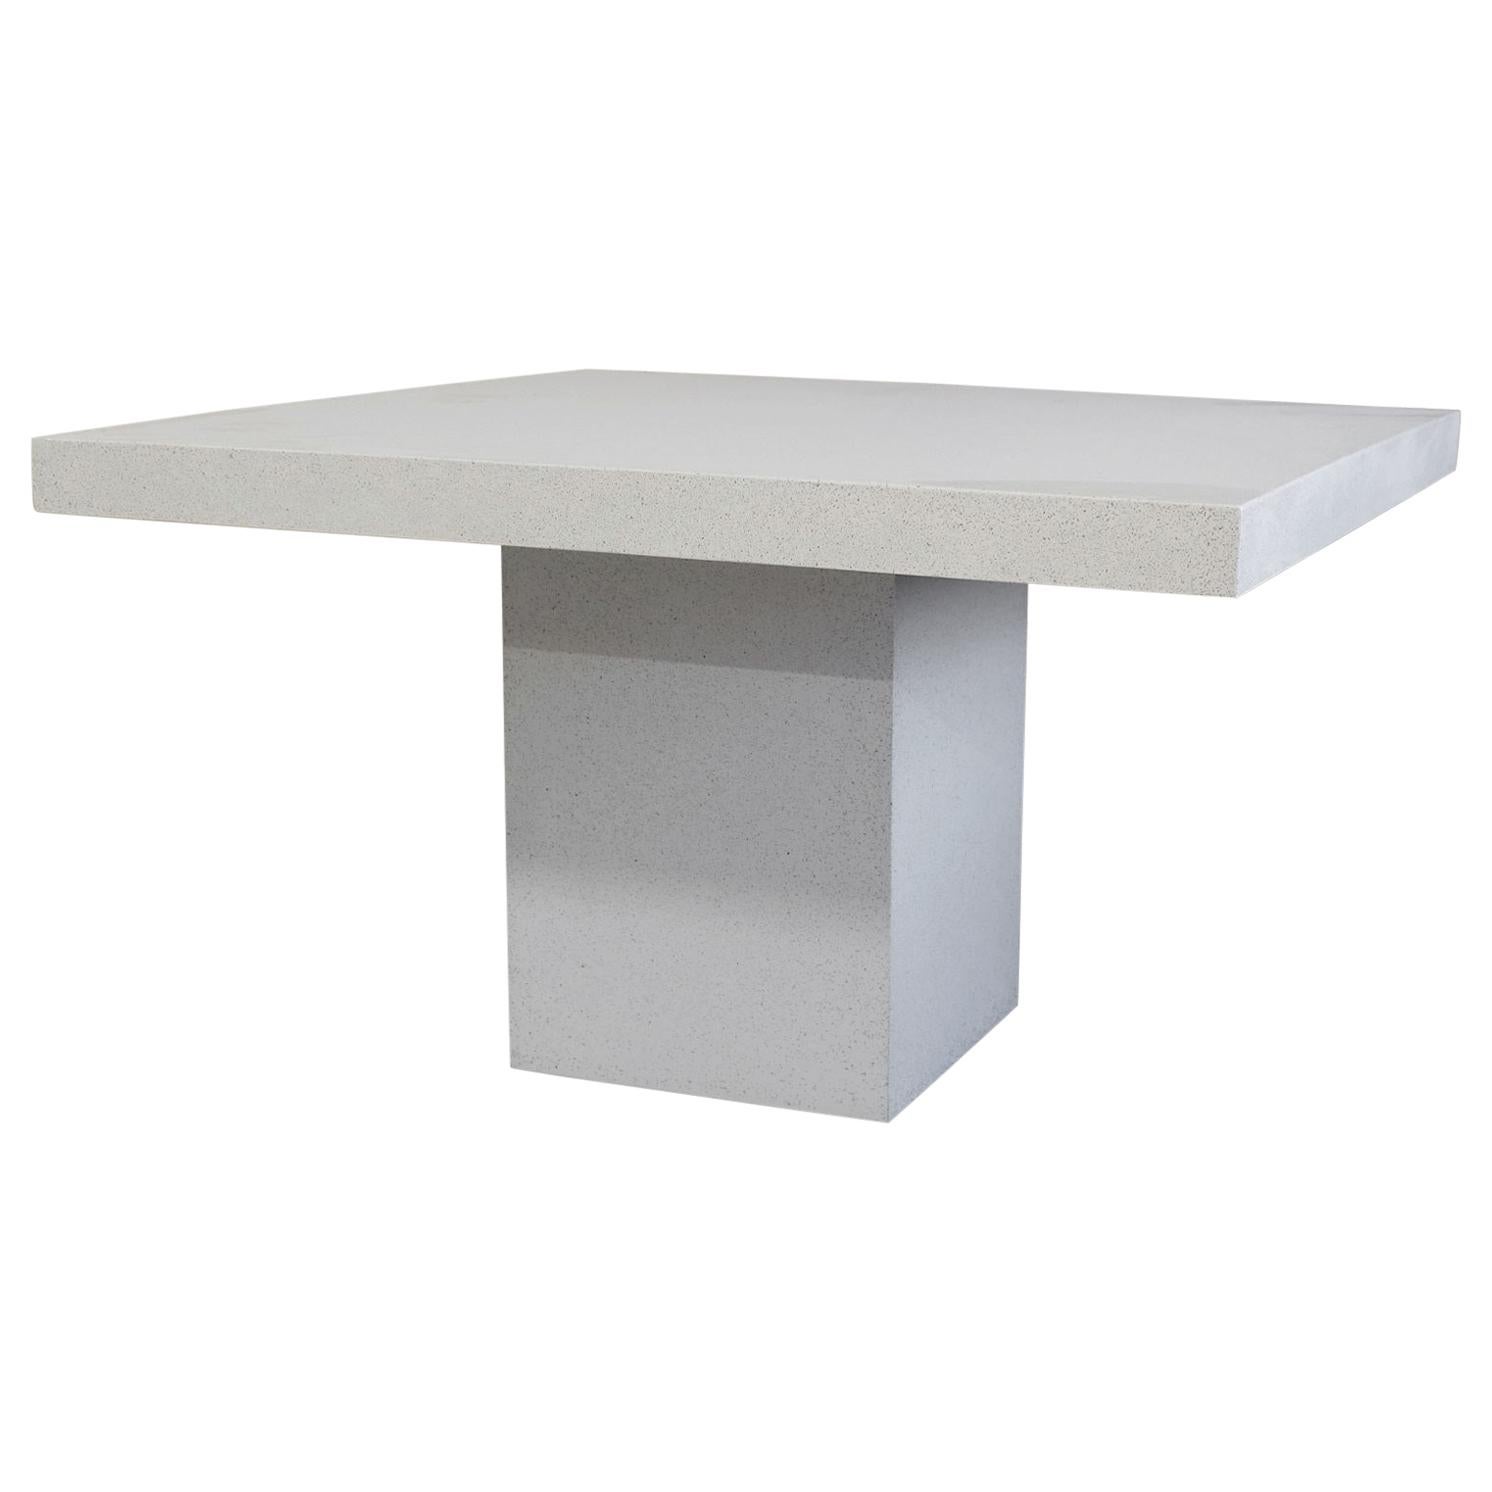 Cast Resin 'Square Slab' Dining Table, White Stone Finish by Zachary A. Design For Sale